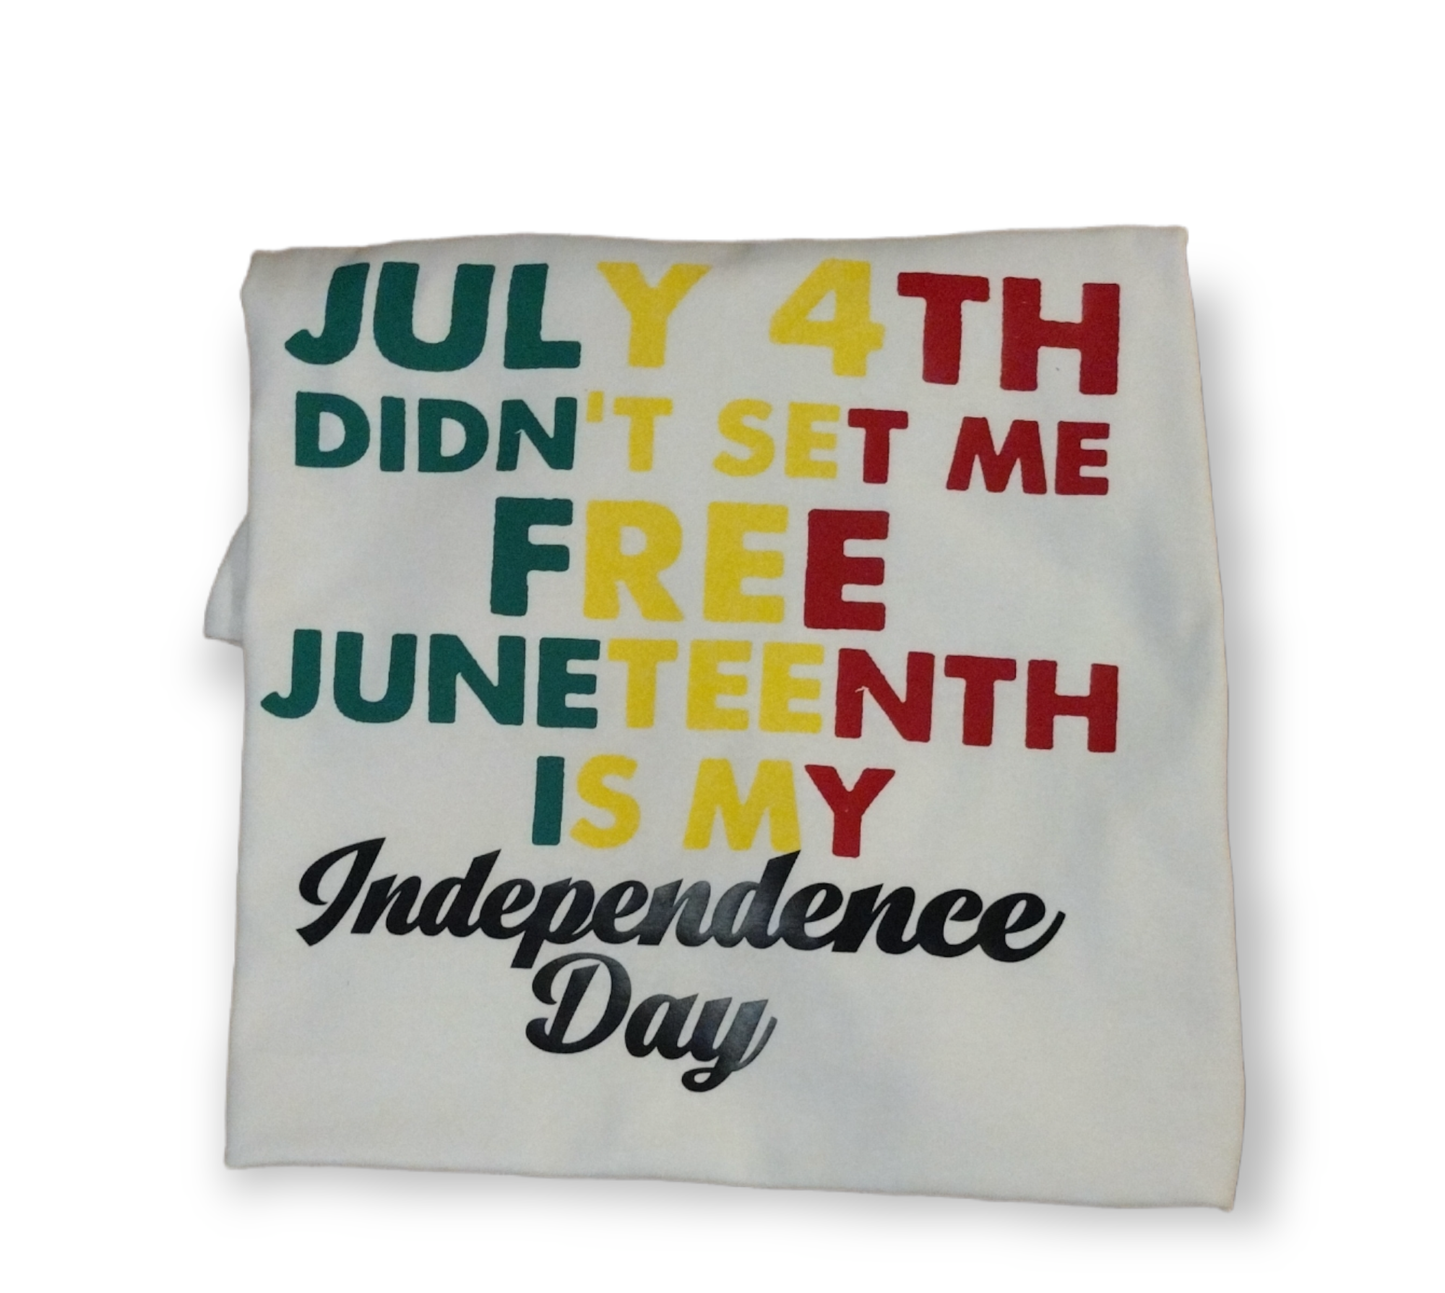 July 4th Didnt Set Me Free Juneteenth is My Independence Day T-shirt